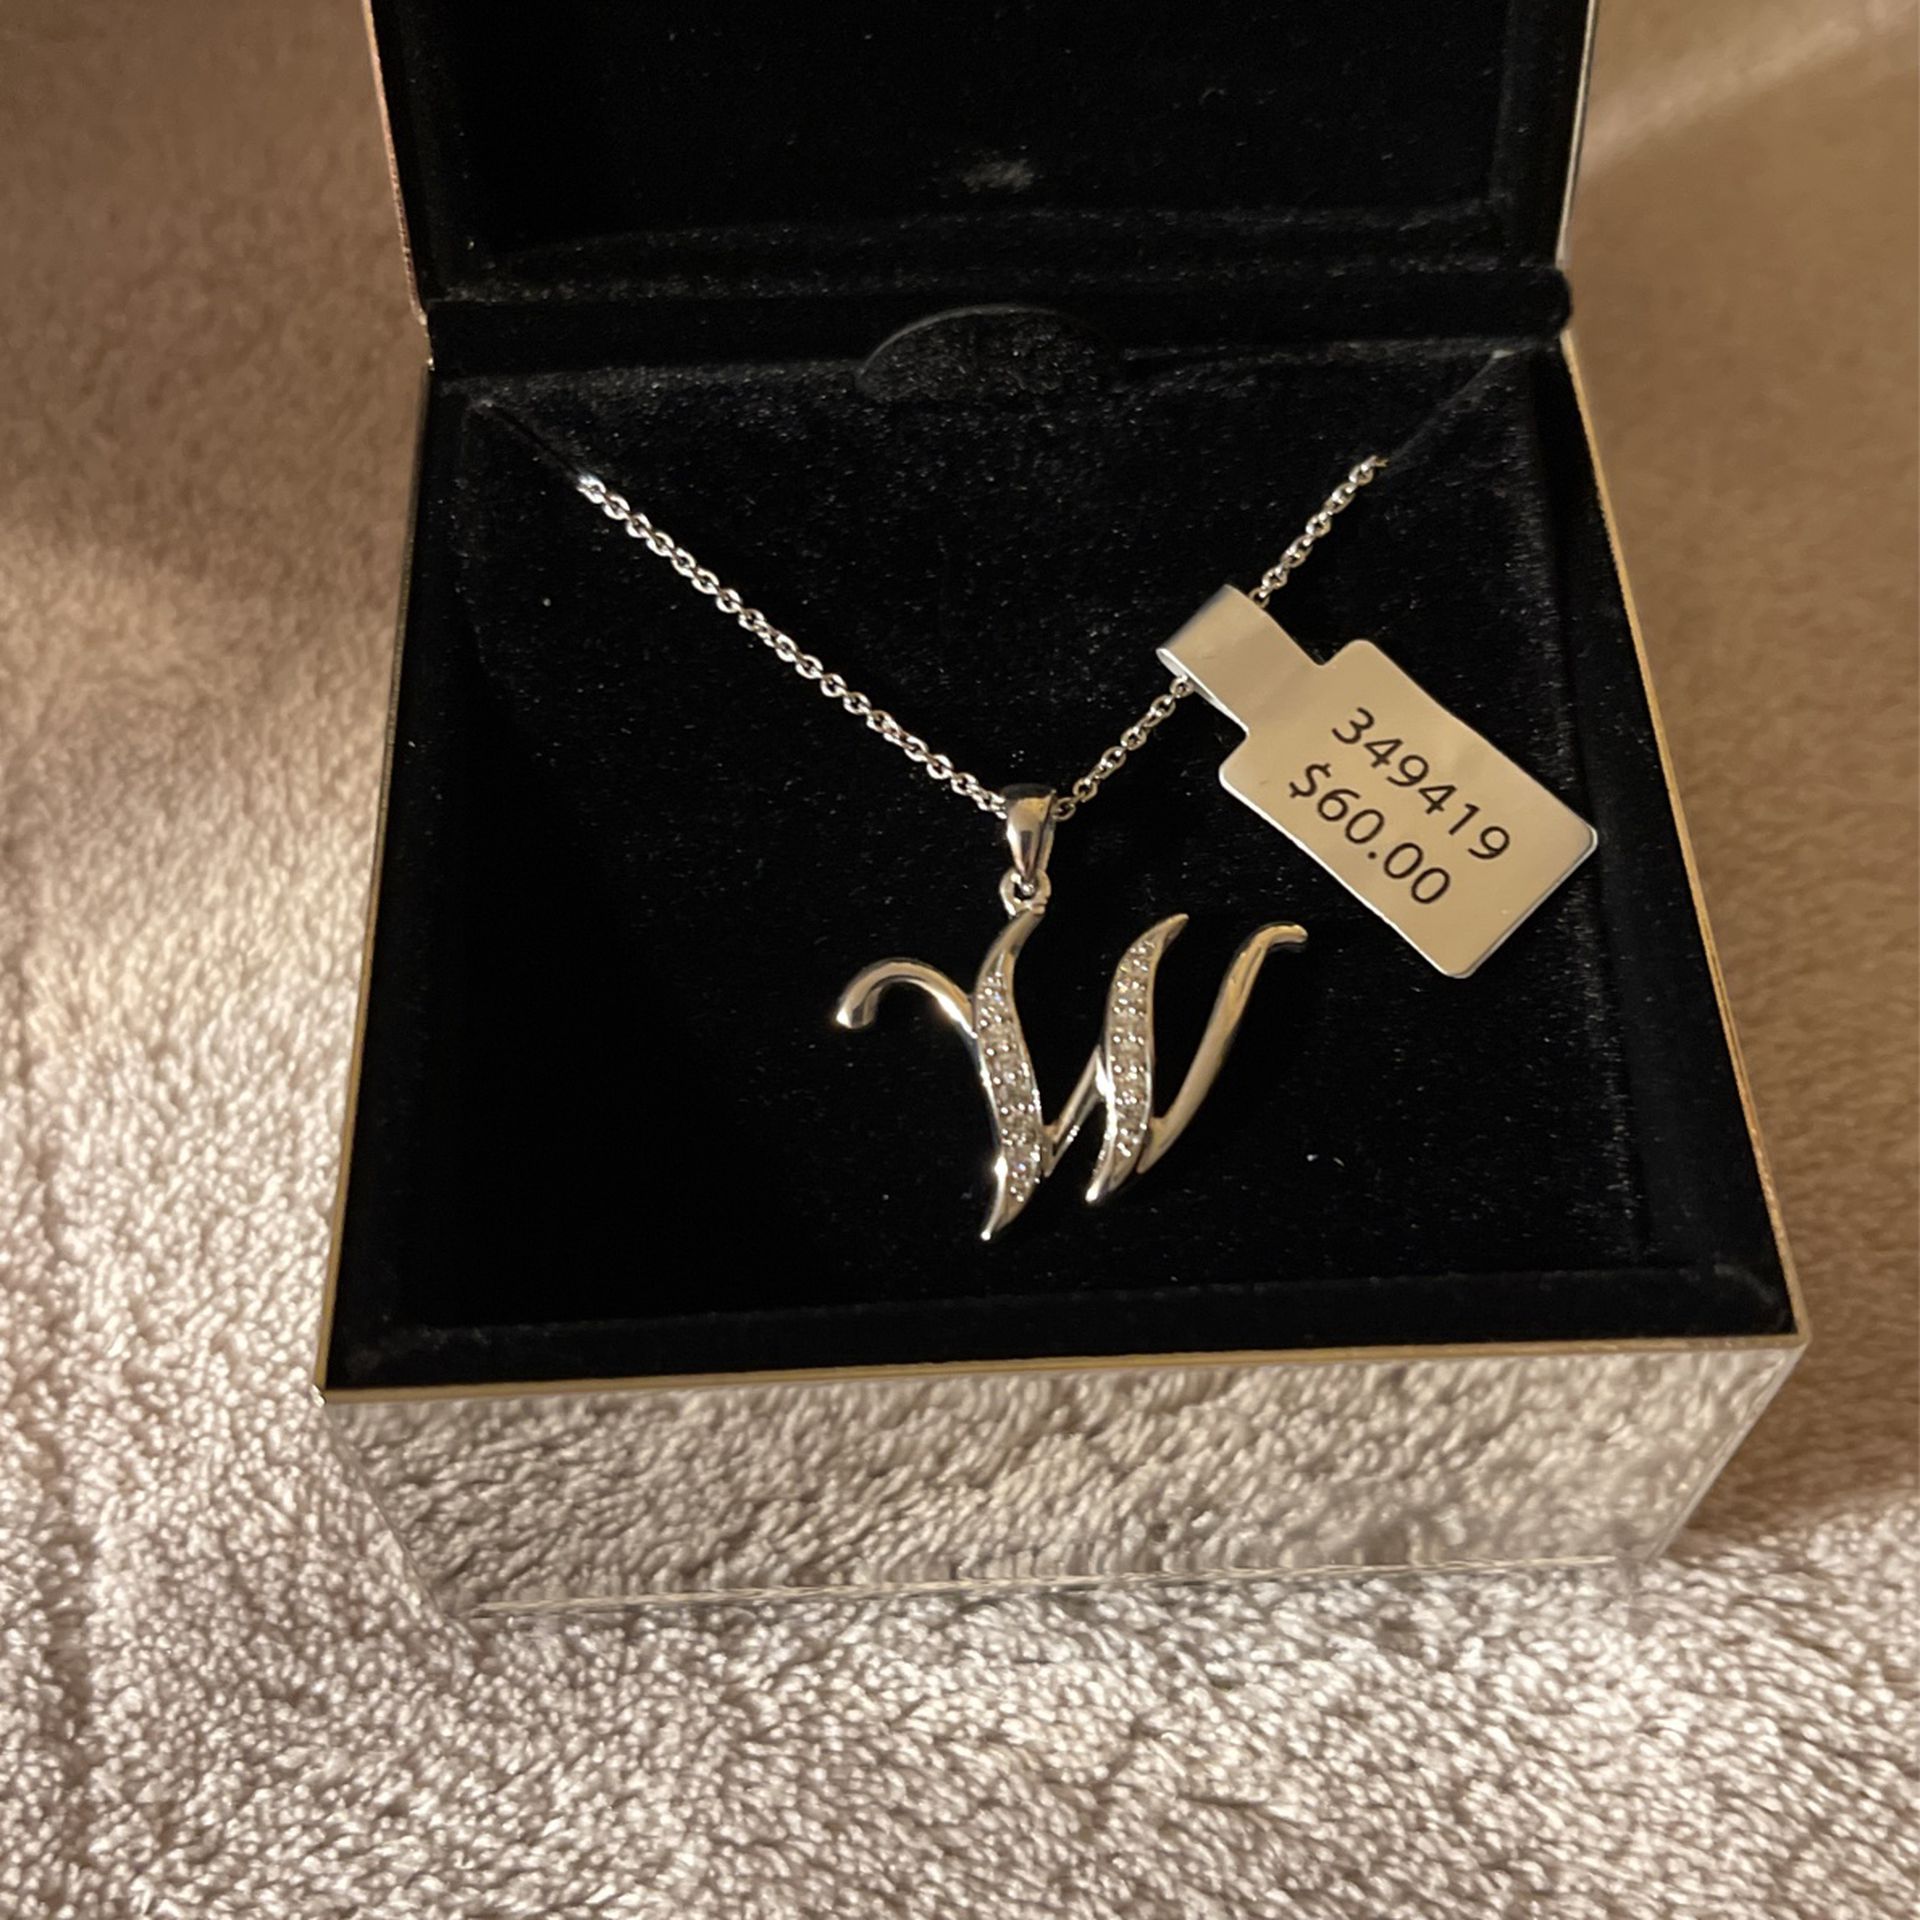 Things Remembered "W" Sterling Silver Necklace